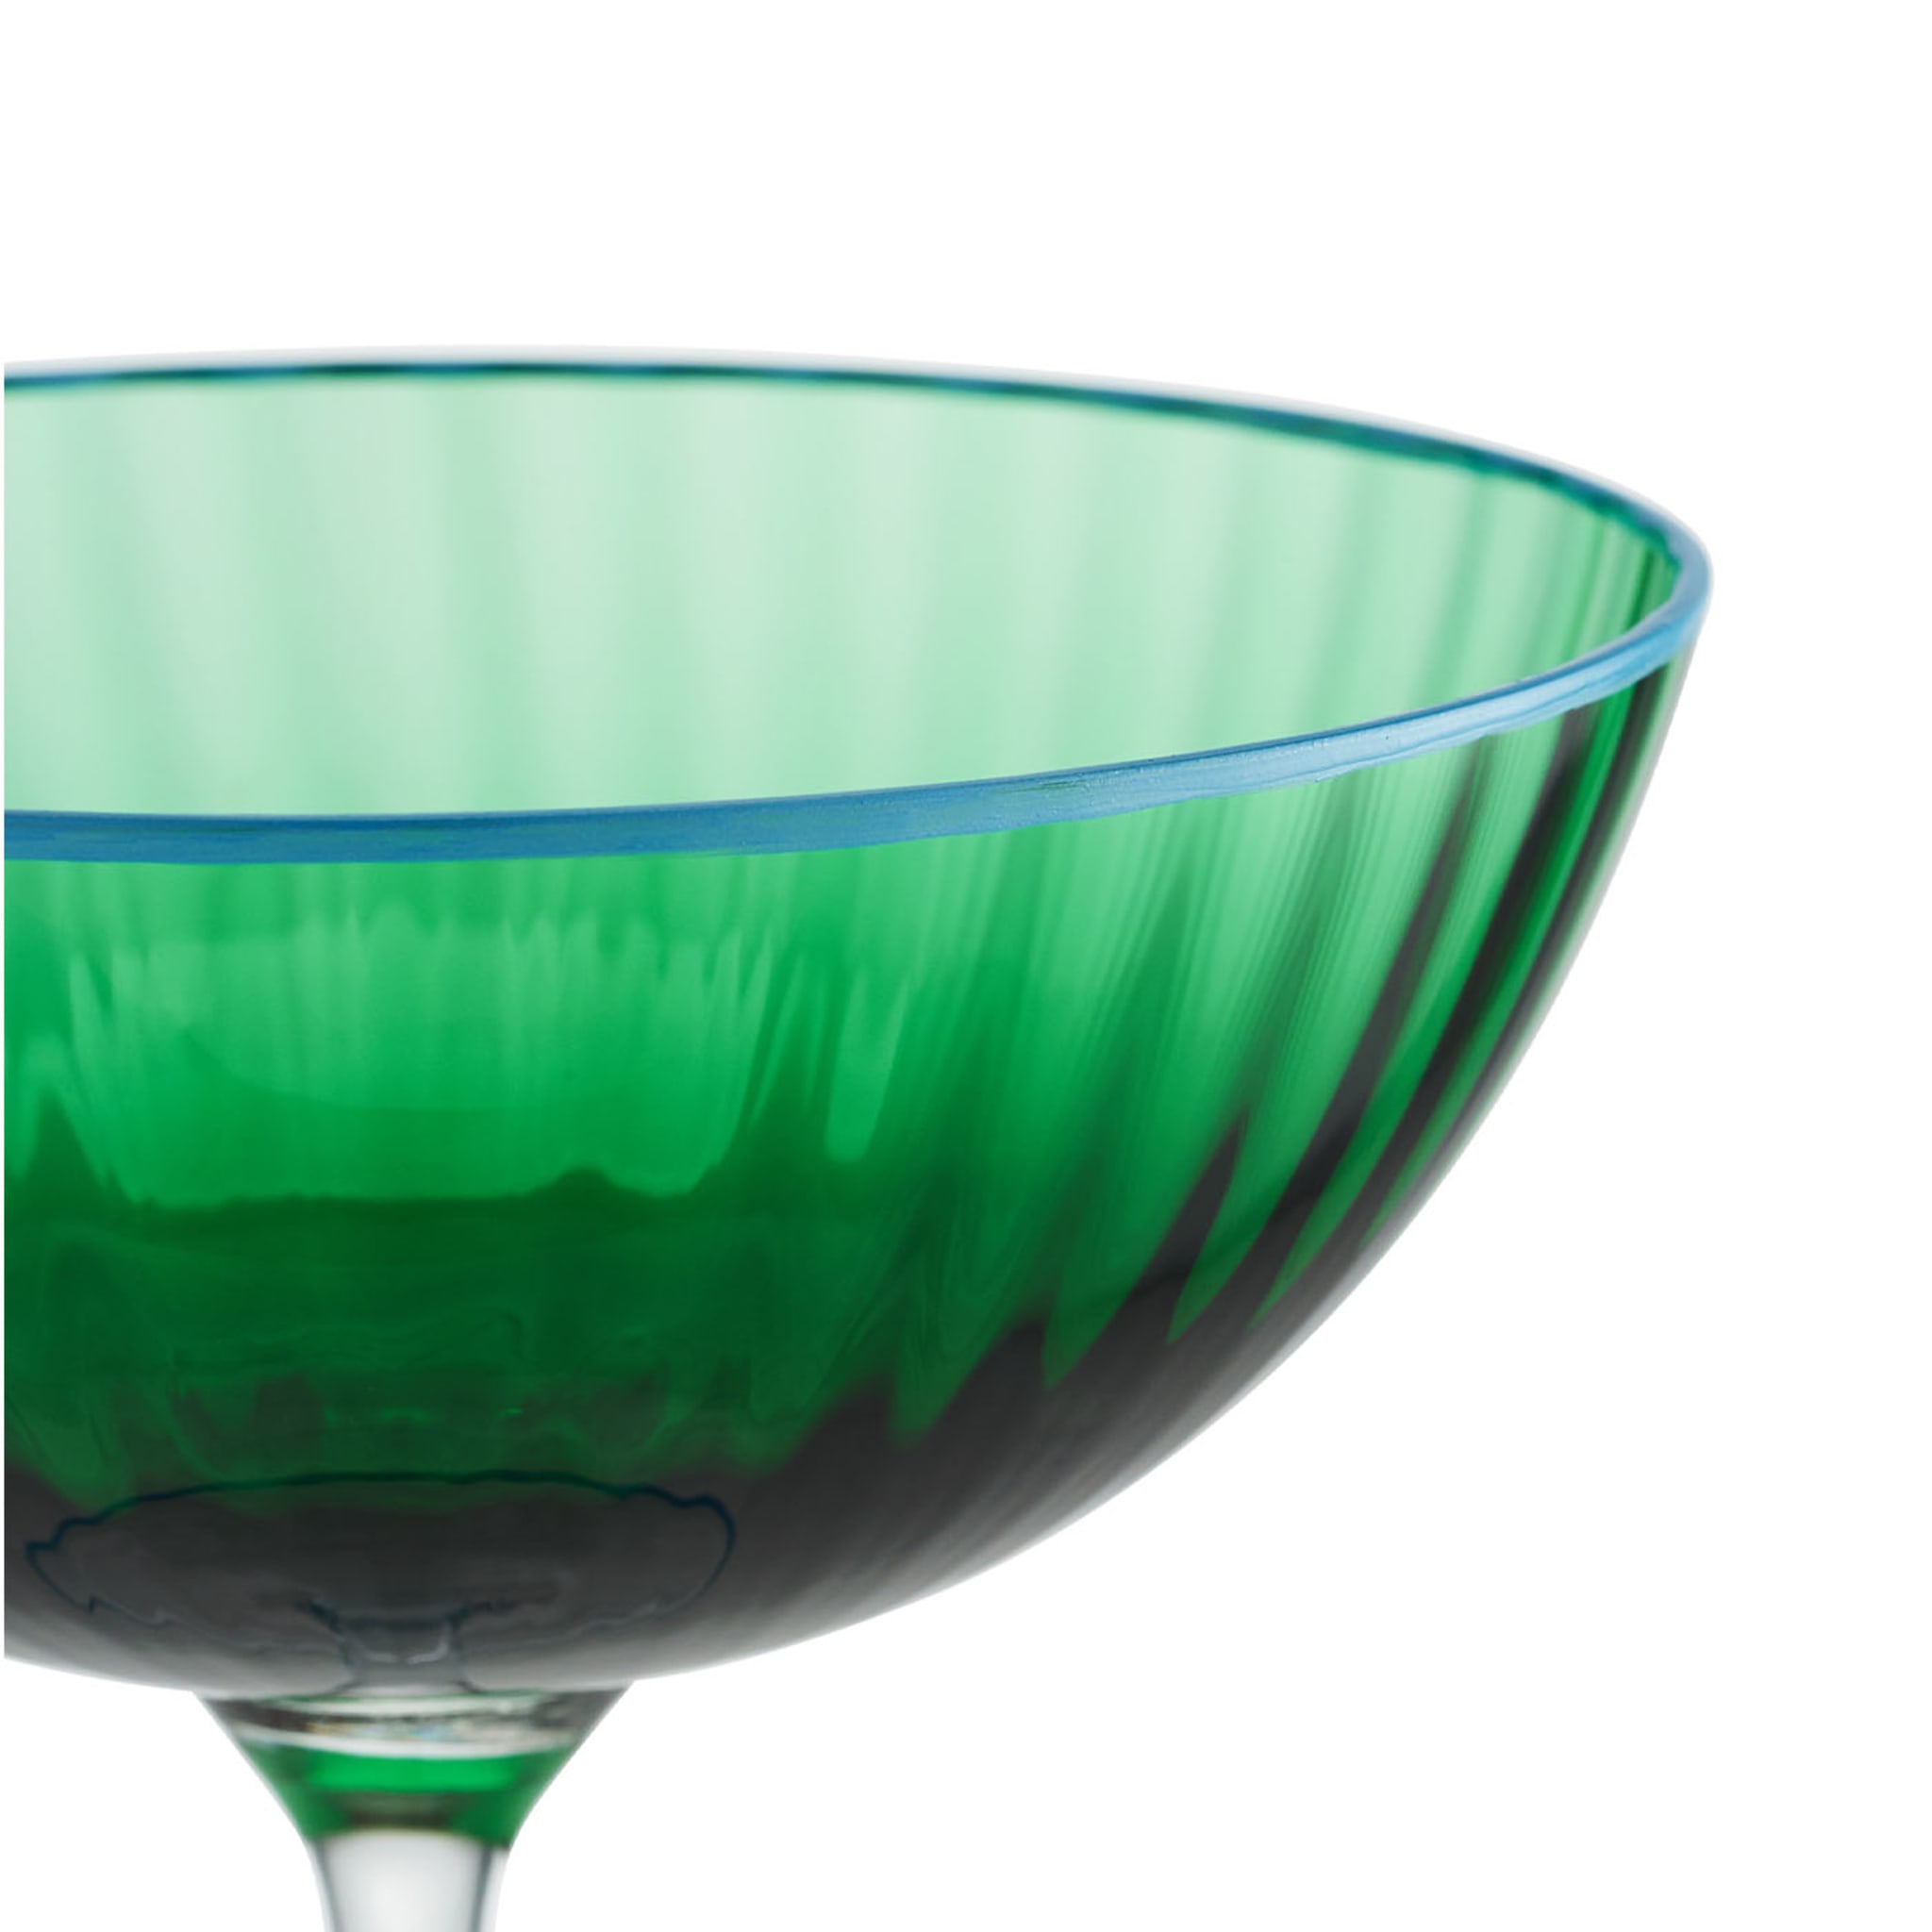 Set of 2 Mouth-Blown Emerald & Turquoise Champagne Glasses - Alternative view 1